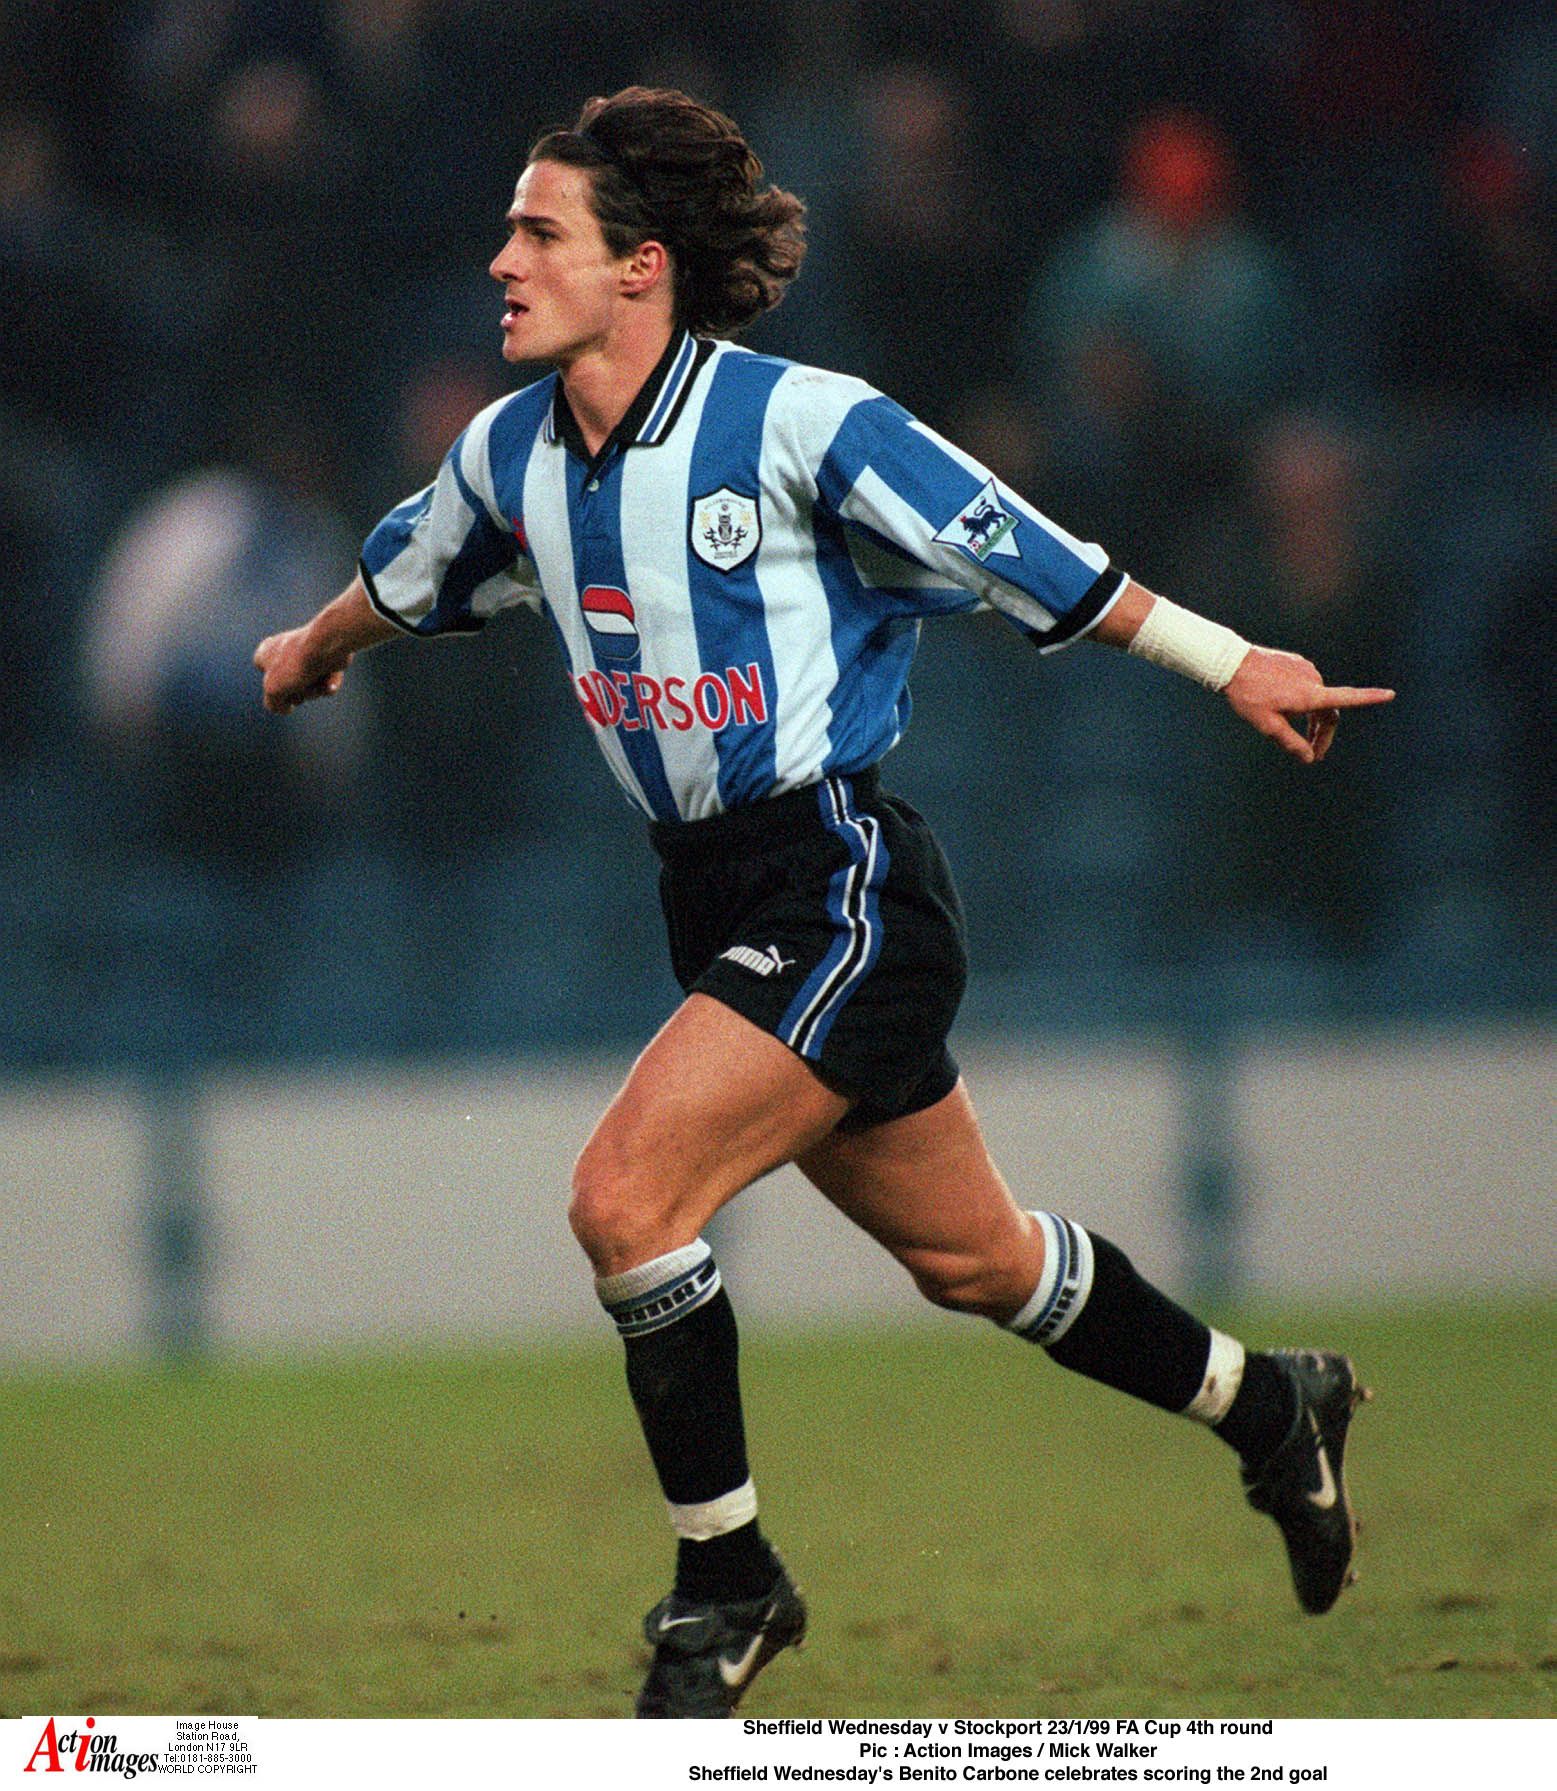 Sheffield Wednesday v Stockport 23/1/99 FA Cup 4th round 
Pic : Action Images / Mick Walker 
Sheffield Wednesday's Benito Carbone celebrates scoring the 2nd goal